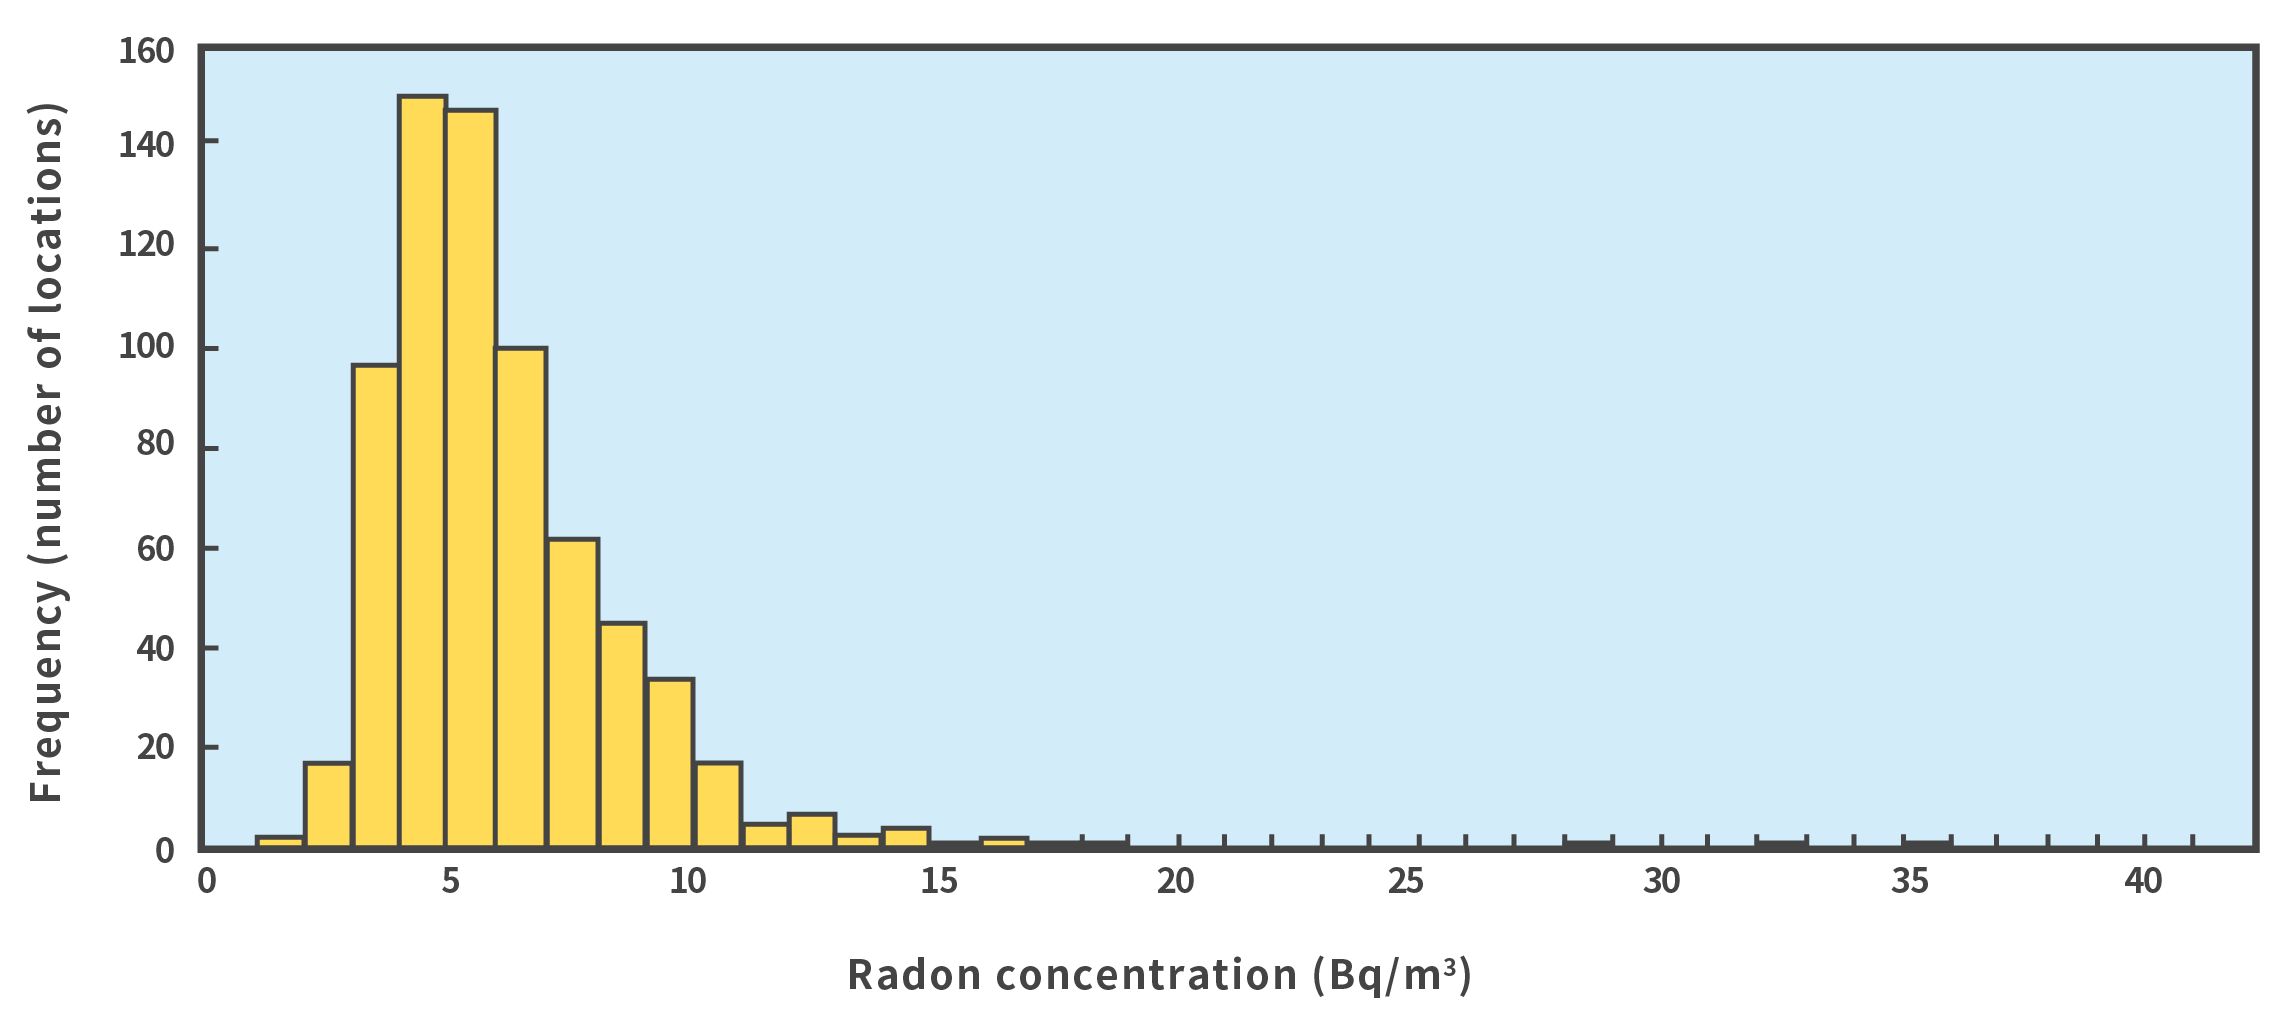 Frequency distribution of outdoor radon concentration in Japan